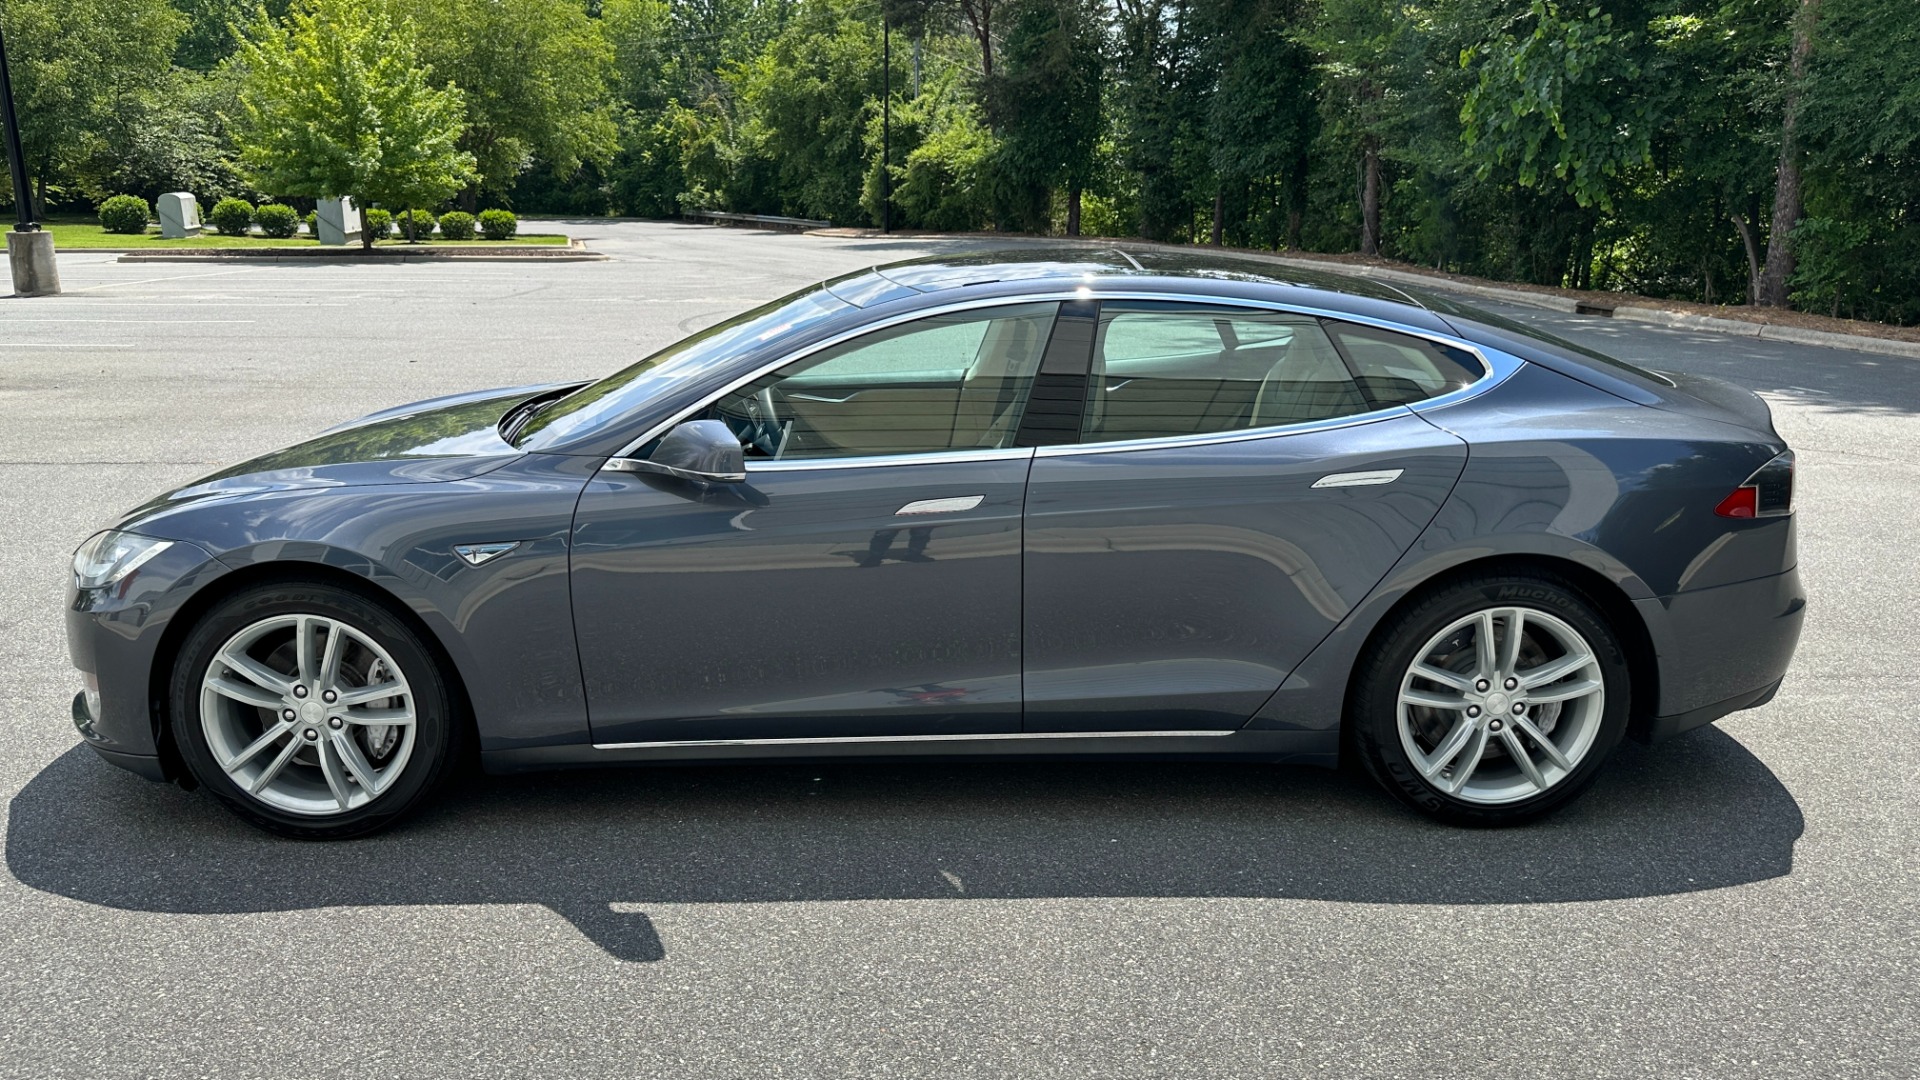 Used 2014 Tesla Model S 60 kWh Battery / 60D / PREMIUM CONNECTIVITY / LEATHER / SUNROOF for sale $22,995 at Formula Imports in Charlotte NC 28227 3